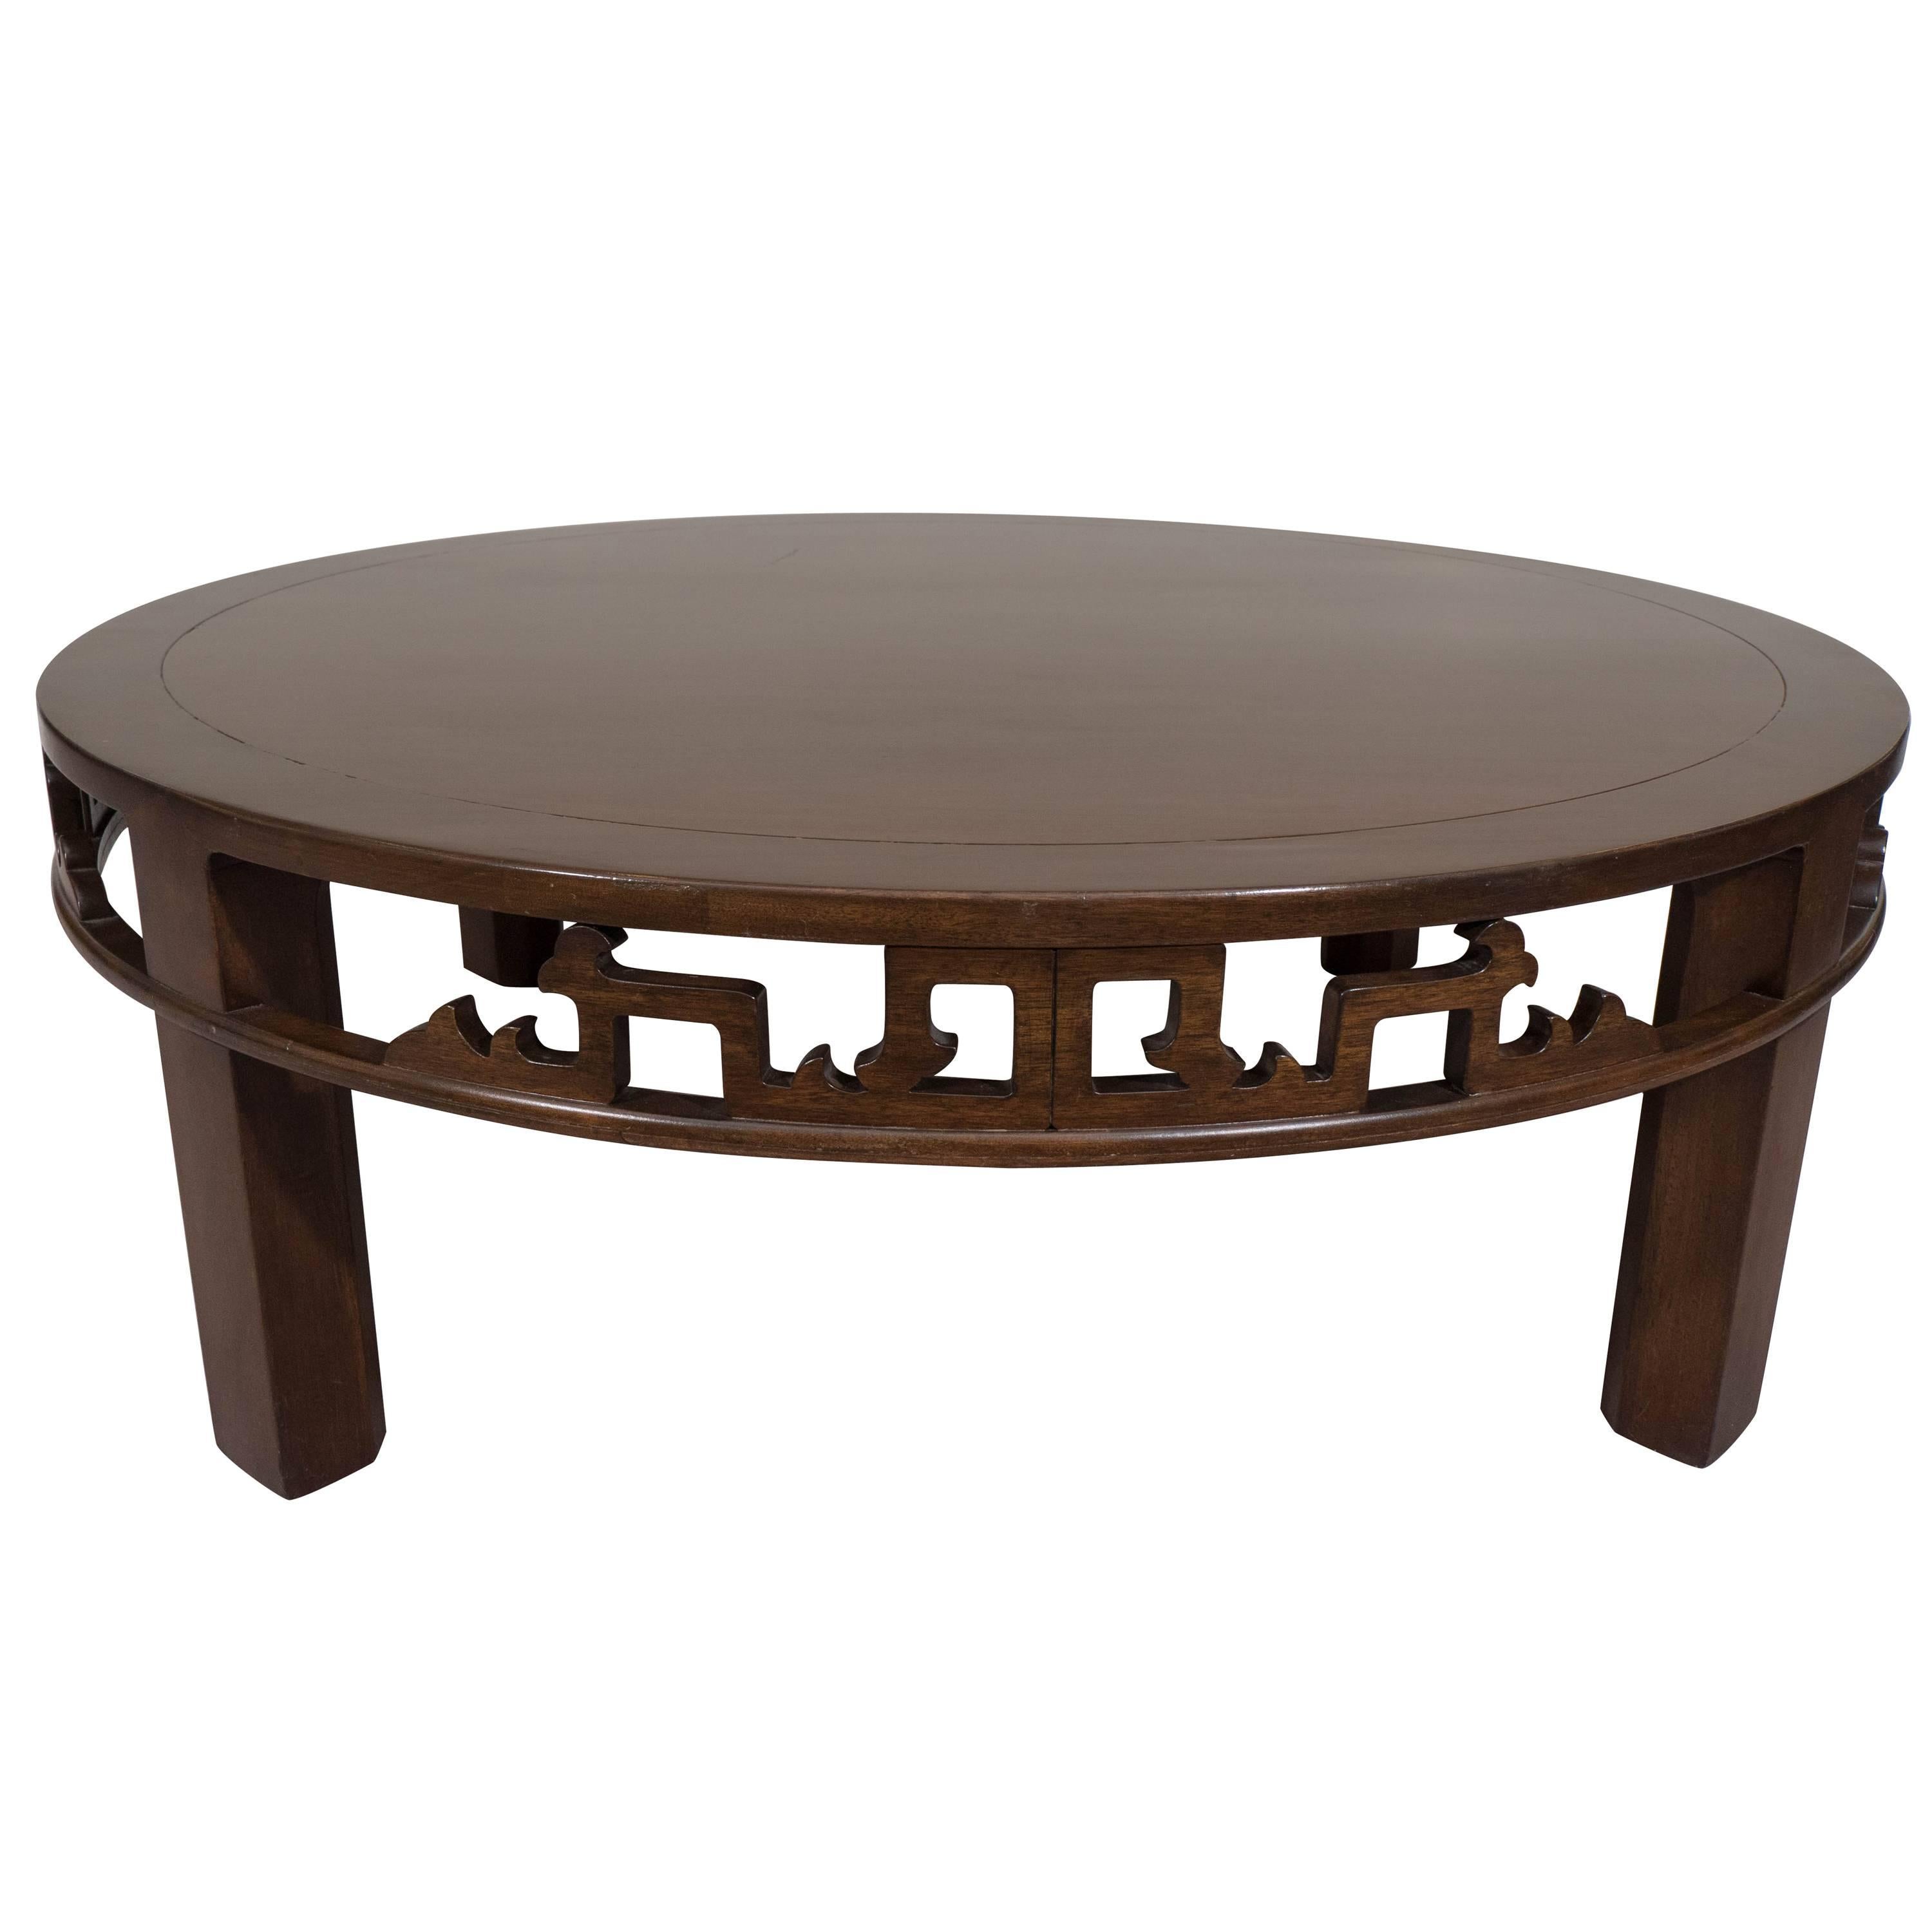 Baker Furniture Asian Inspired Round Coffee Table